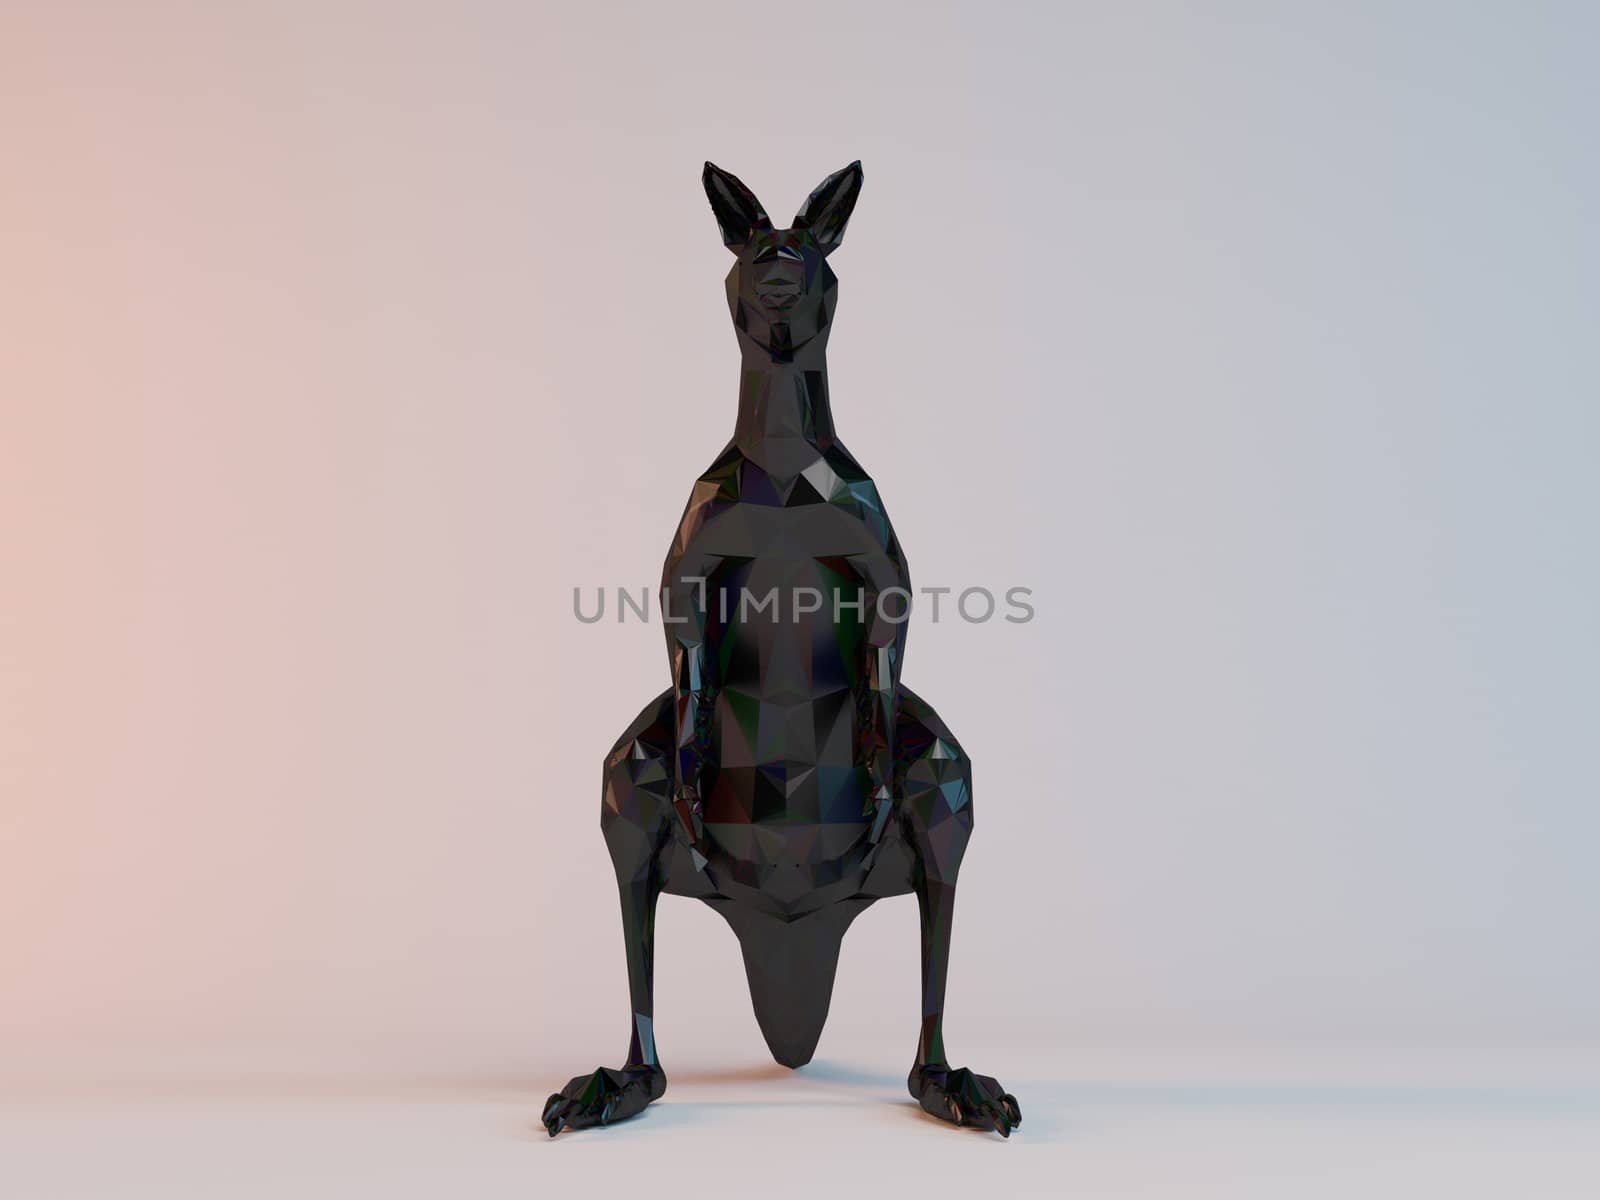 3D black low poly (kangaroo) inside a white stage with high render quality to be used as a logo, medal, symbol, shape, emblem, icon, children story, or any other use.